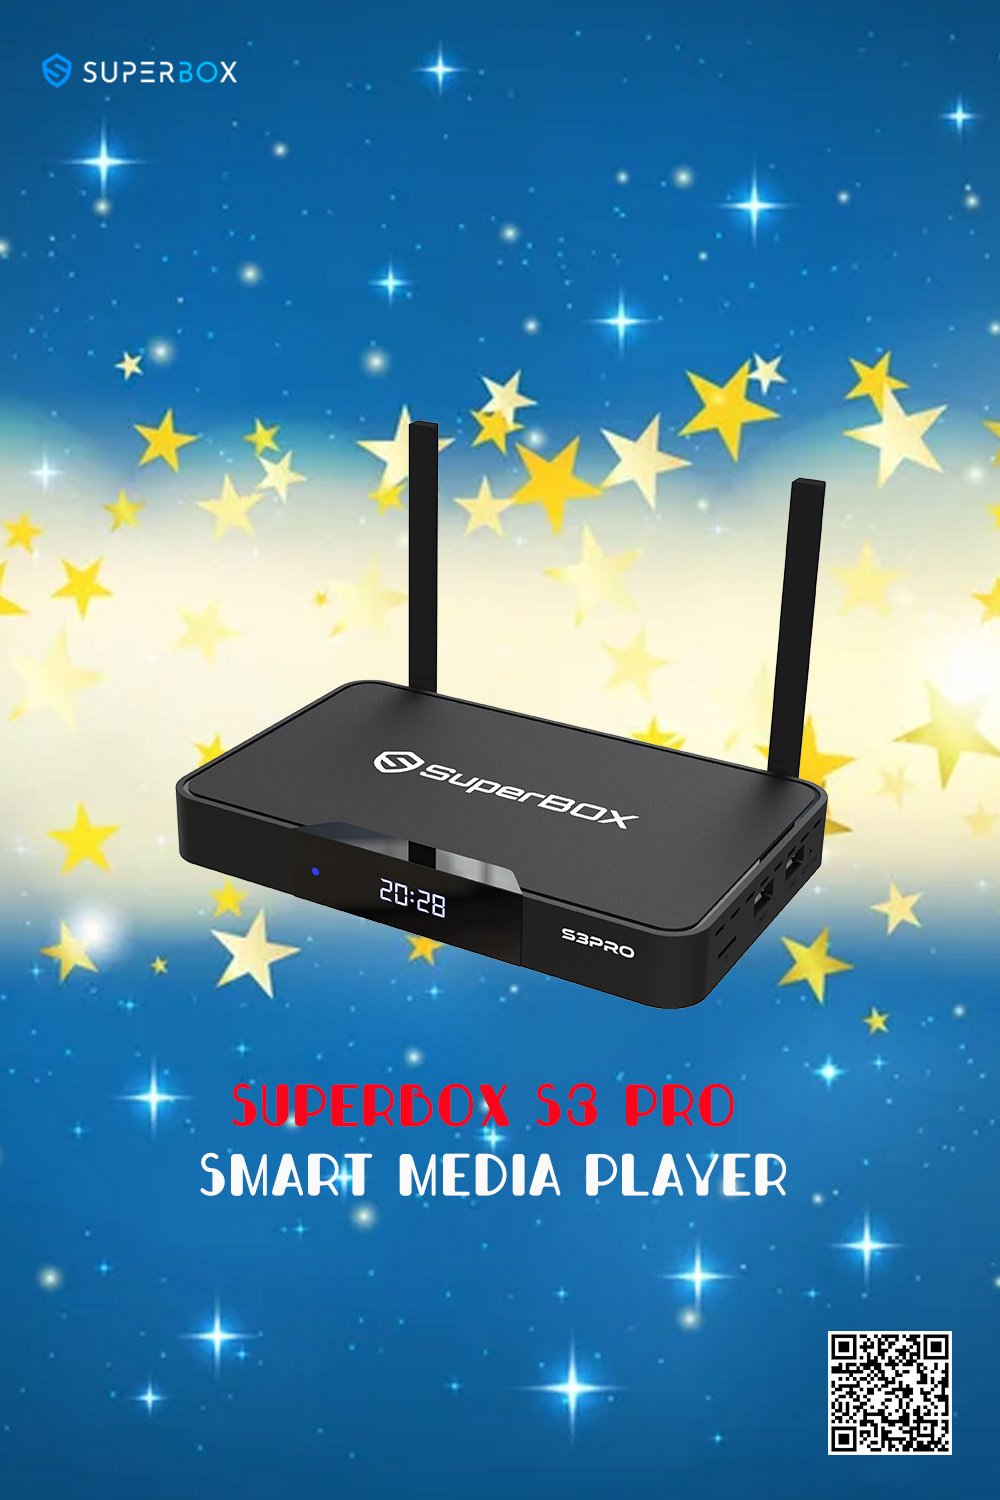 SuperBox S3 Pro Smart Media Player Review